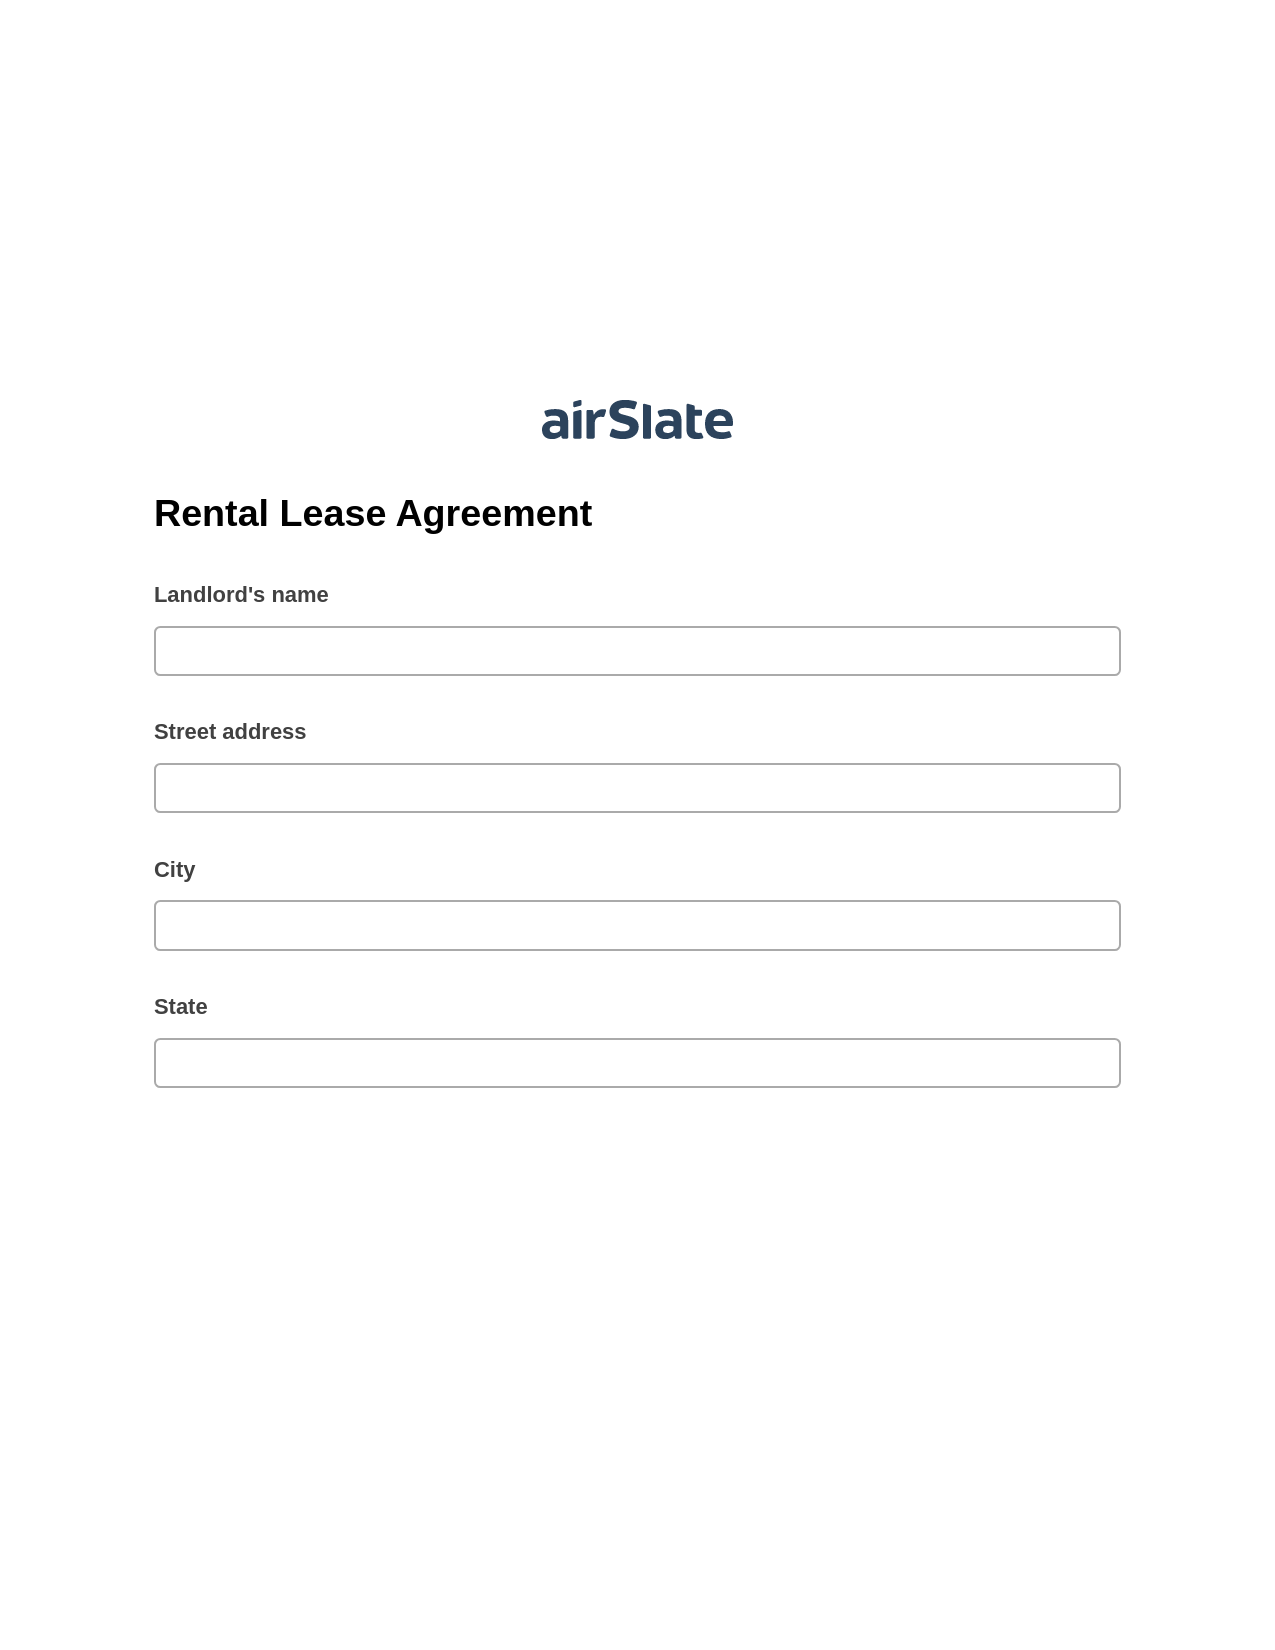 Rental Lease Agreement Pre-fill from Office 365 Excel Bot, Unassign Role Bot, Dropbox Bot